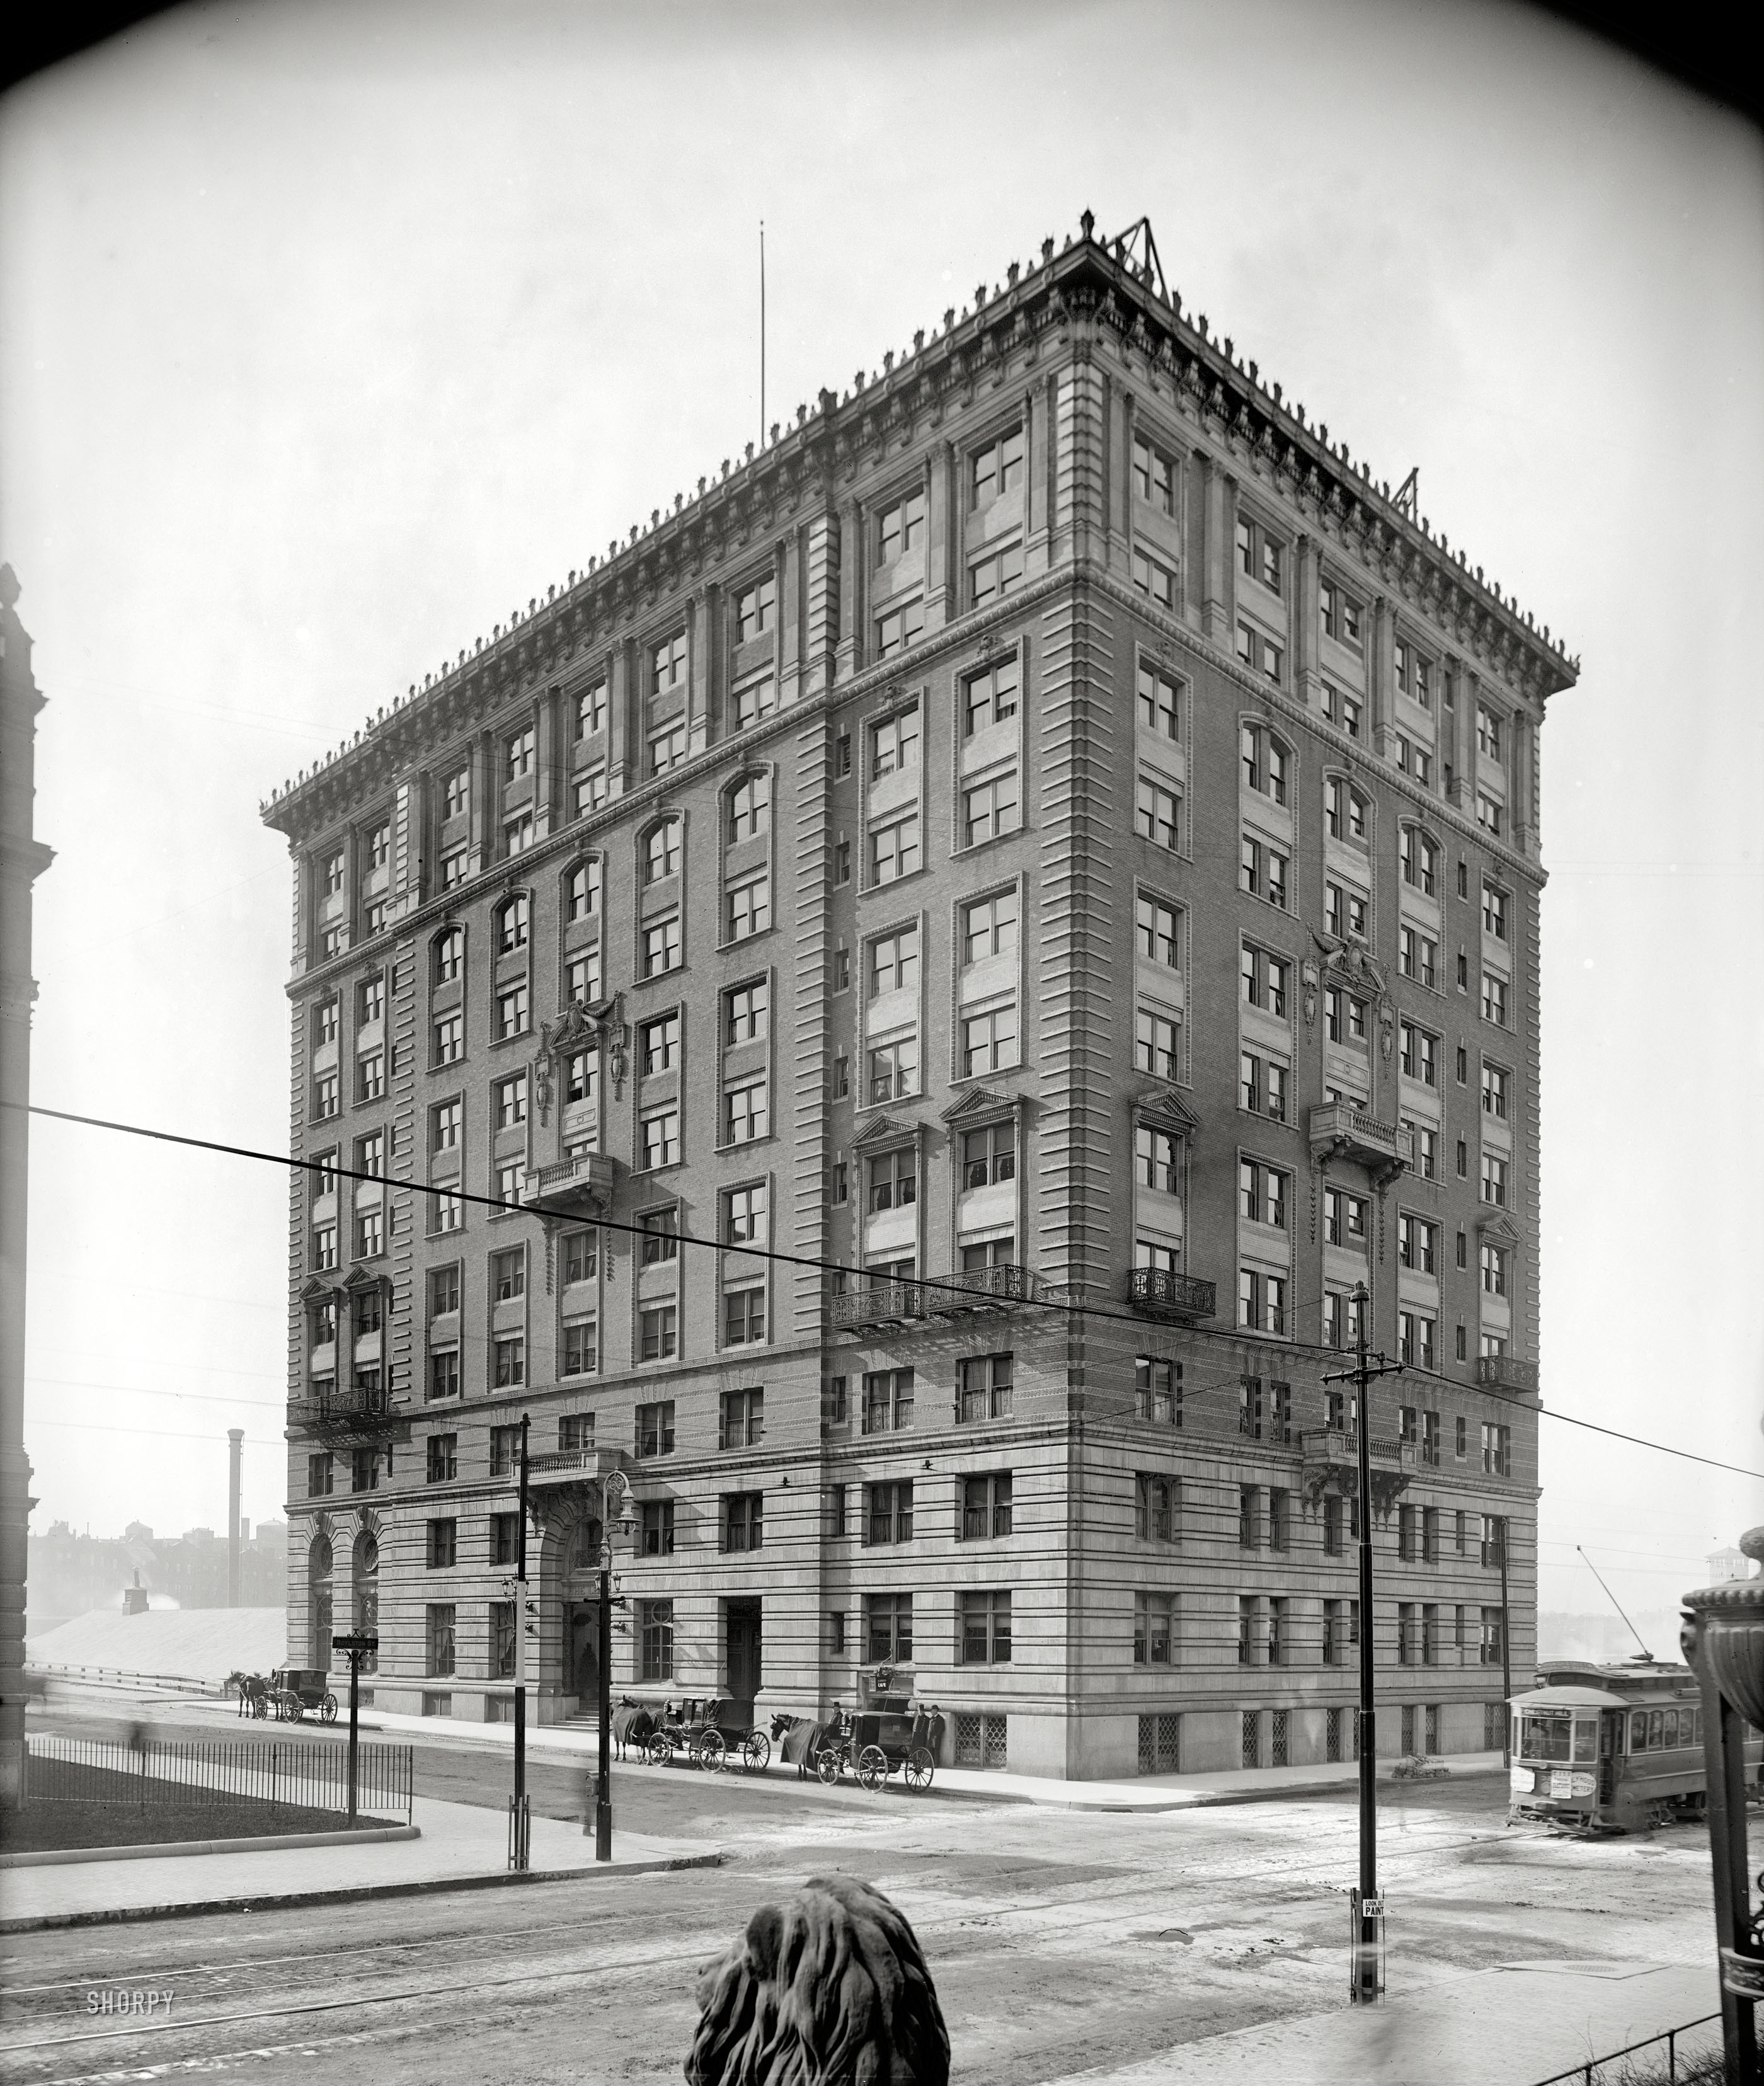 Boston circa 1906. "Hotel Lenox." A number of hazards to look out for here. 8x10 inch dry plate glass negative, Detroit Publishing Company. View full size.